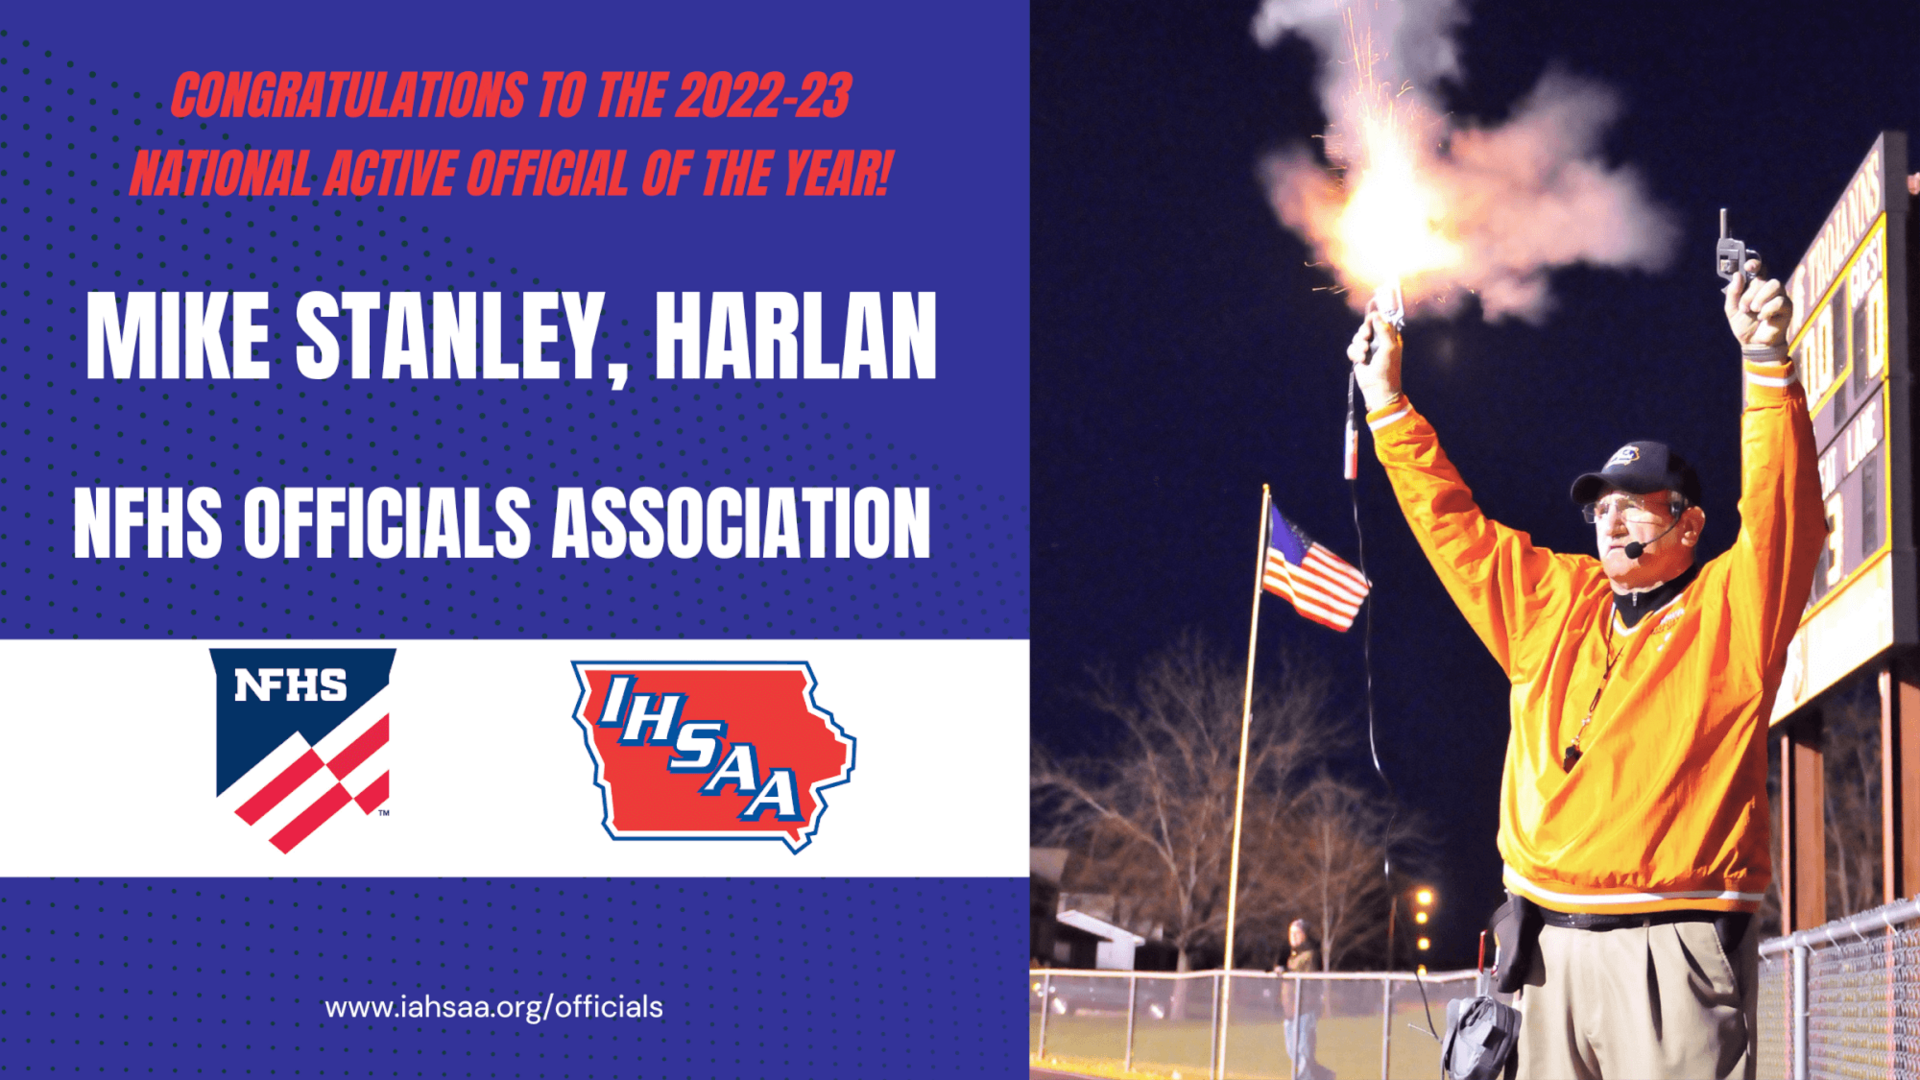 Officials: Stanley leads 2022-23 NFHS honors